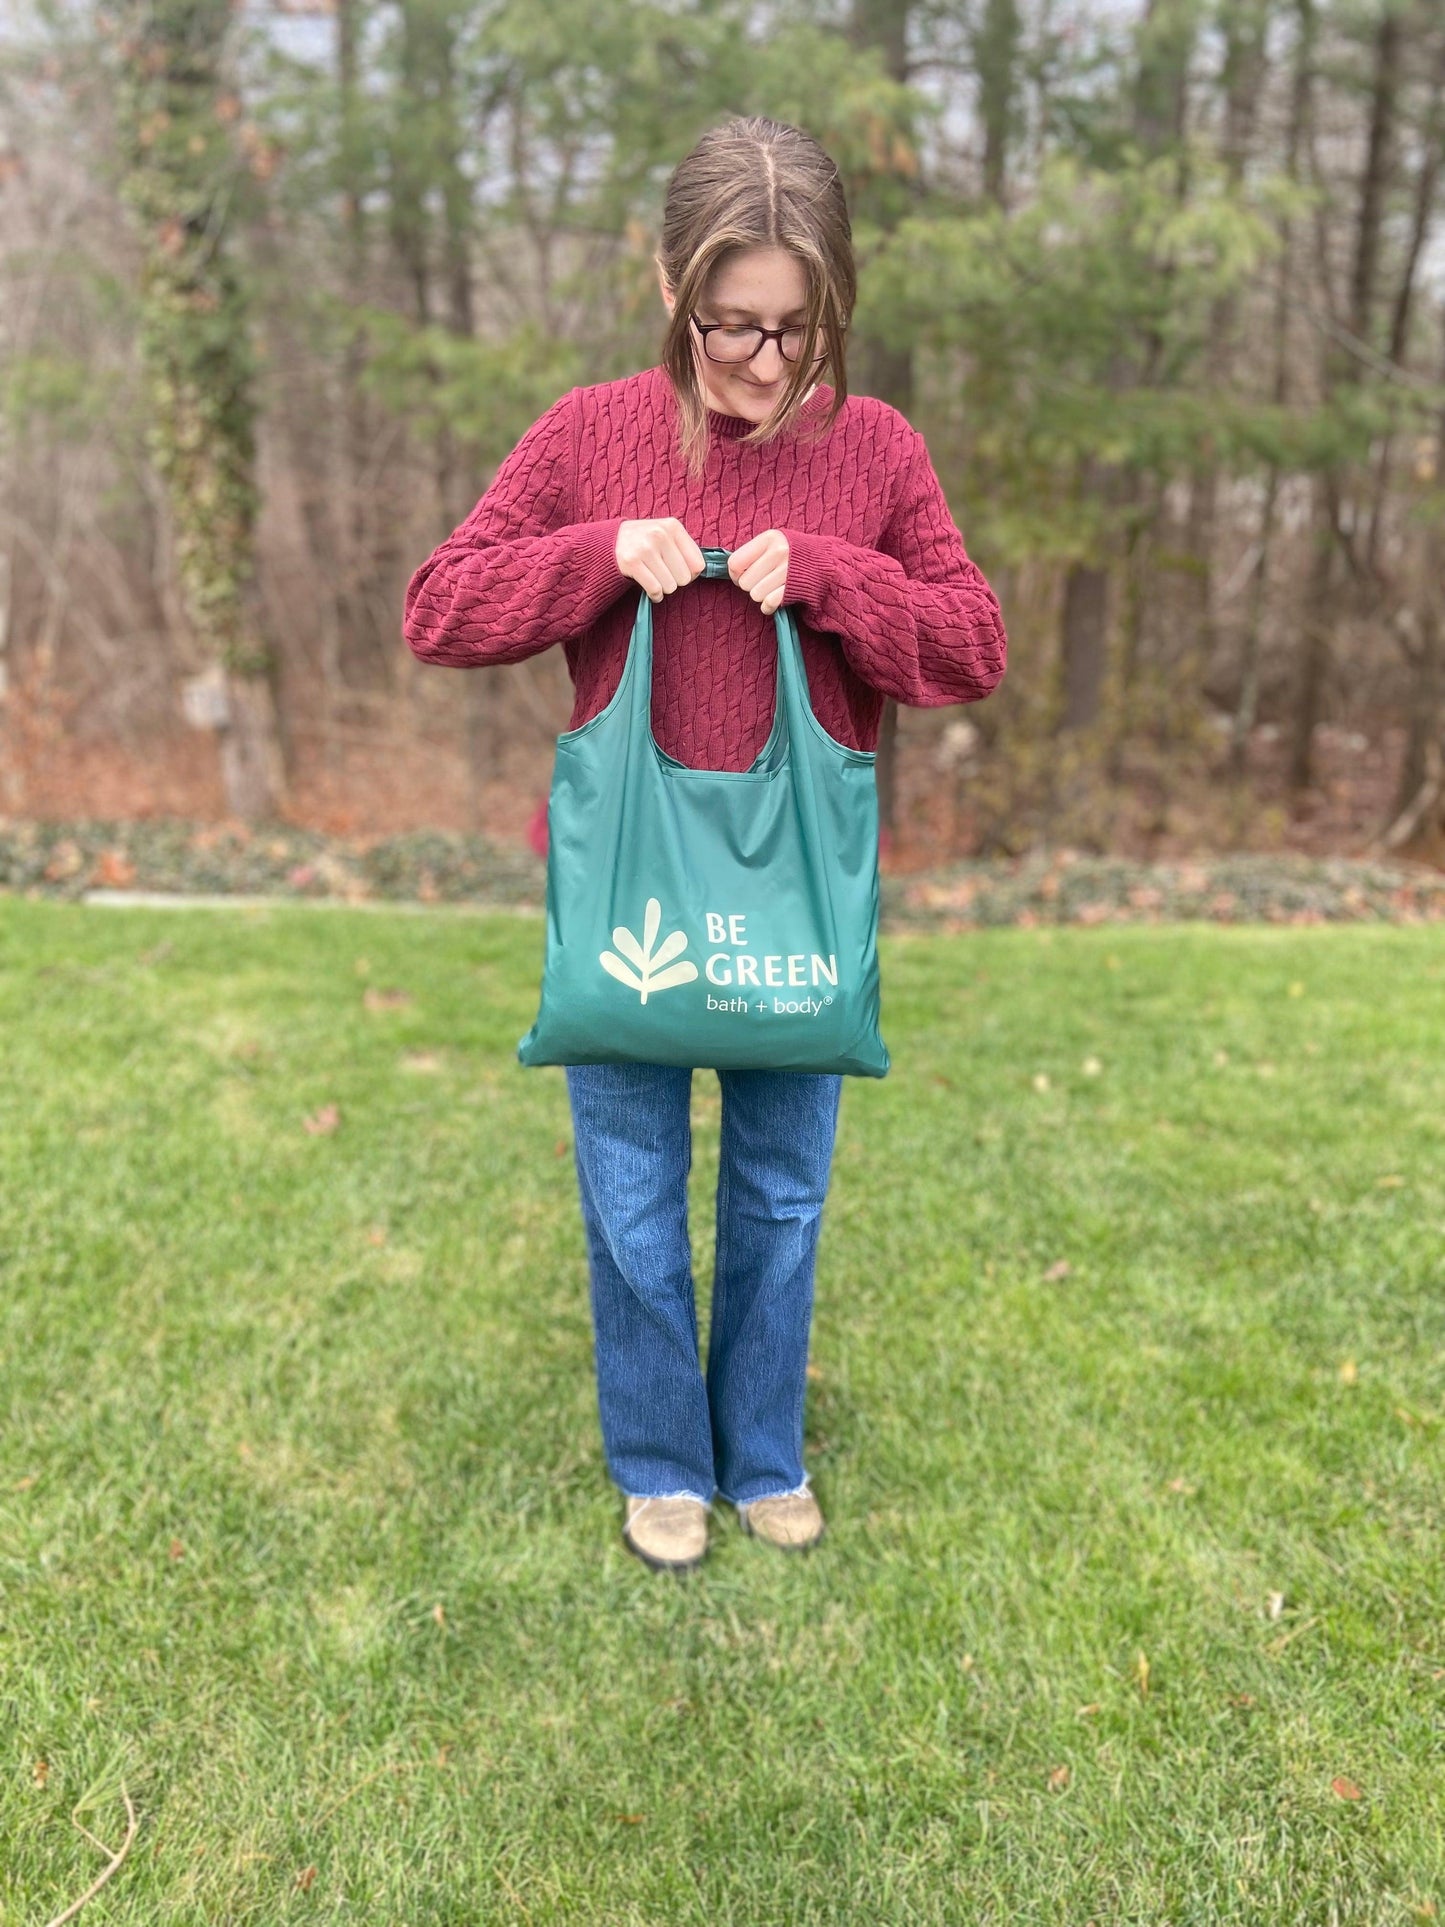 Be Green reusable tote bag.  Model shows size.